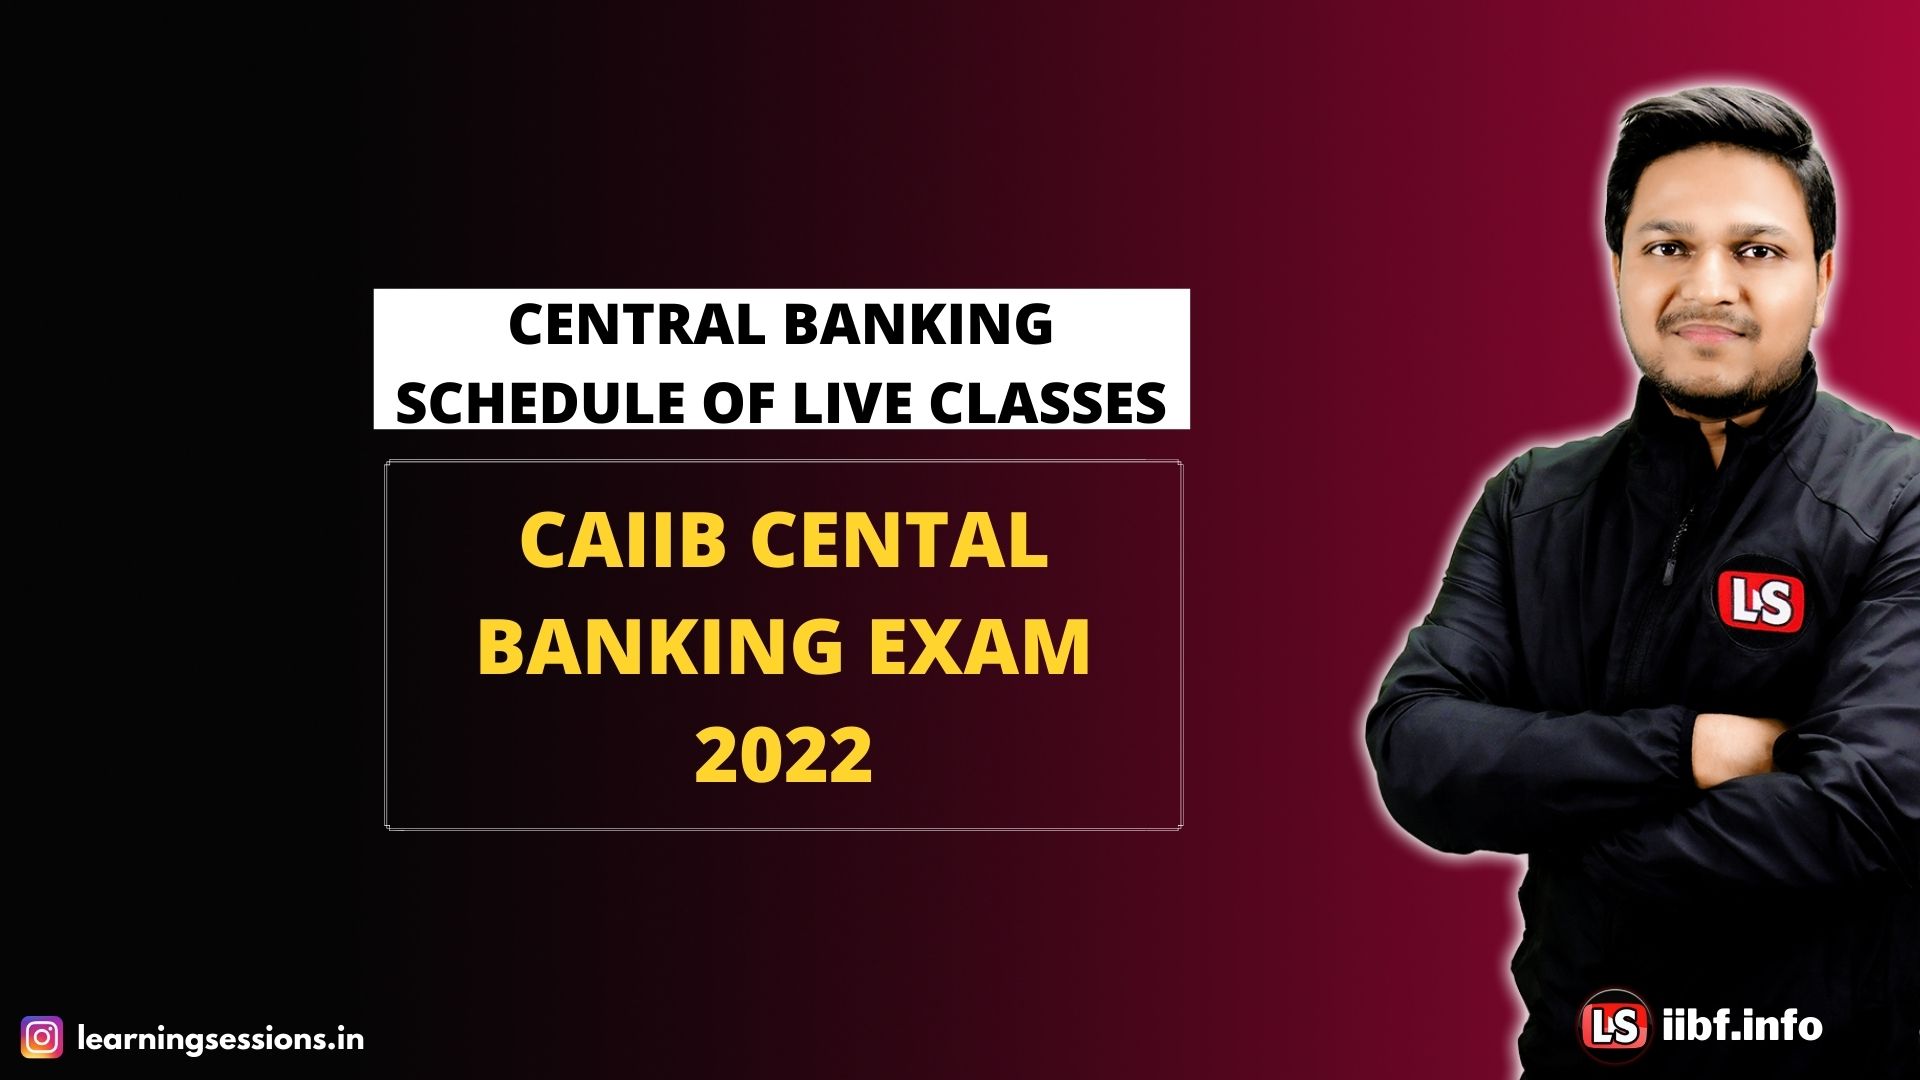 CAIIB CENTRAL BANKING LIVE CLASSES | SCHEDULE OF LIVE CLASSES